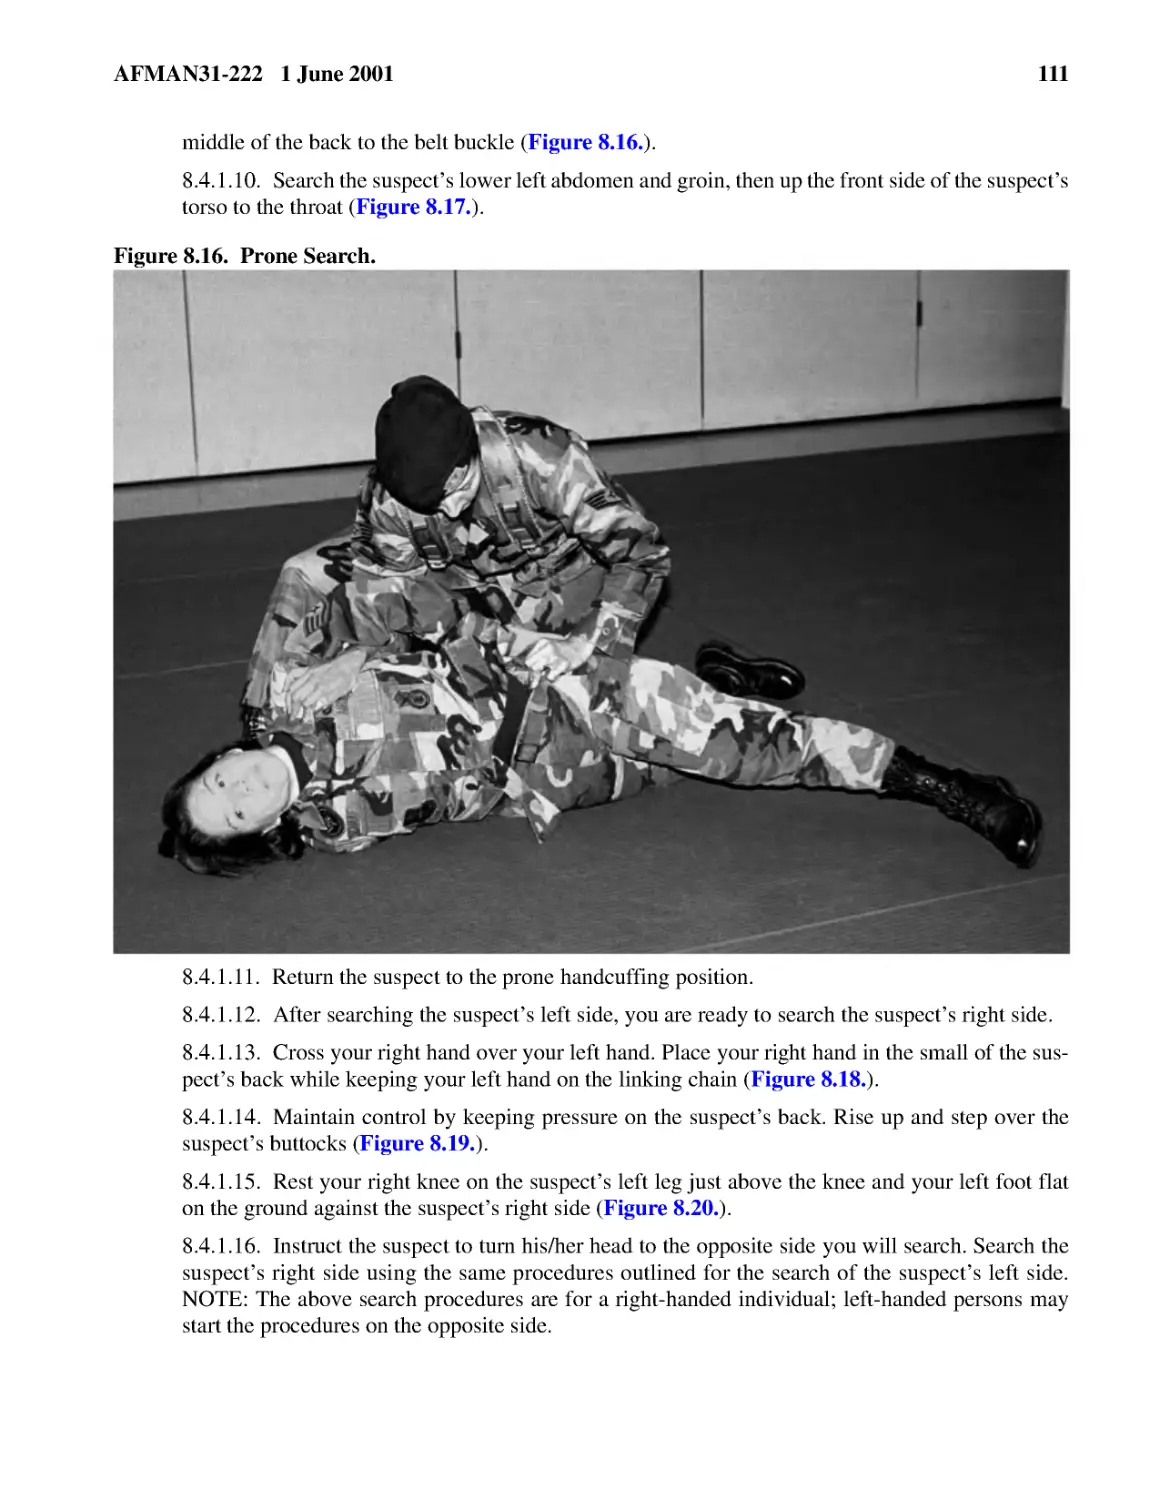 8.4.1.10.� Search the suspect’s lower left abdomen and groin, then up the front side of the suspe...
8.4.1.11.� Return the suspect to the prone handcuffing position.
8.4.1.12.� After searching the suspect’s left side, you are ready to search the suspect’s right s...
8.4.1.13.� Cross your right hand over your left hand. Place your right hand in the small of the s...
8.4.1.14.� Maintain control by keeping pressure on the suspect’s back. Rise up and step over the ...
8.4.1.15.� Rest your right knee on the suspect’s left leg just above the knee and your left foot ...
8.4.1.16.� Instruct the suspect to turn his/her head to the opposite side you will search. Search...